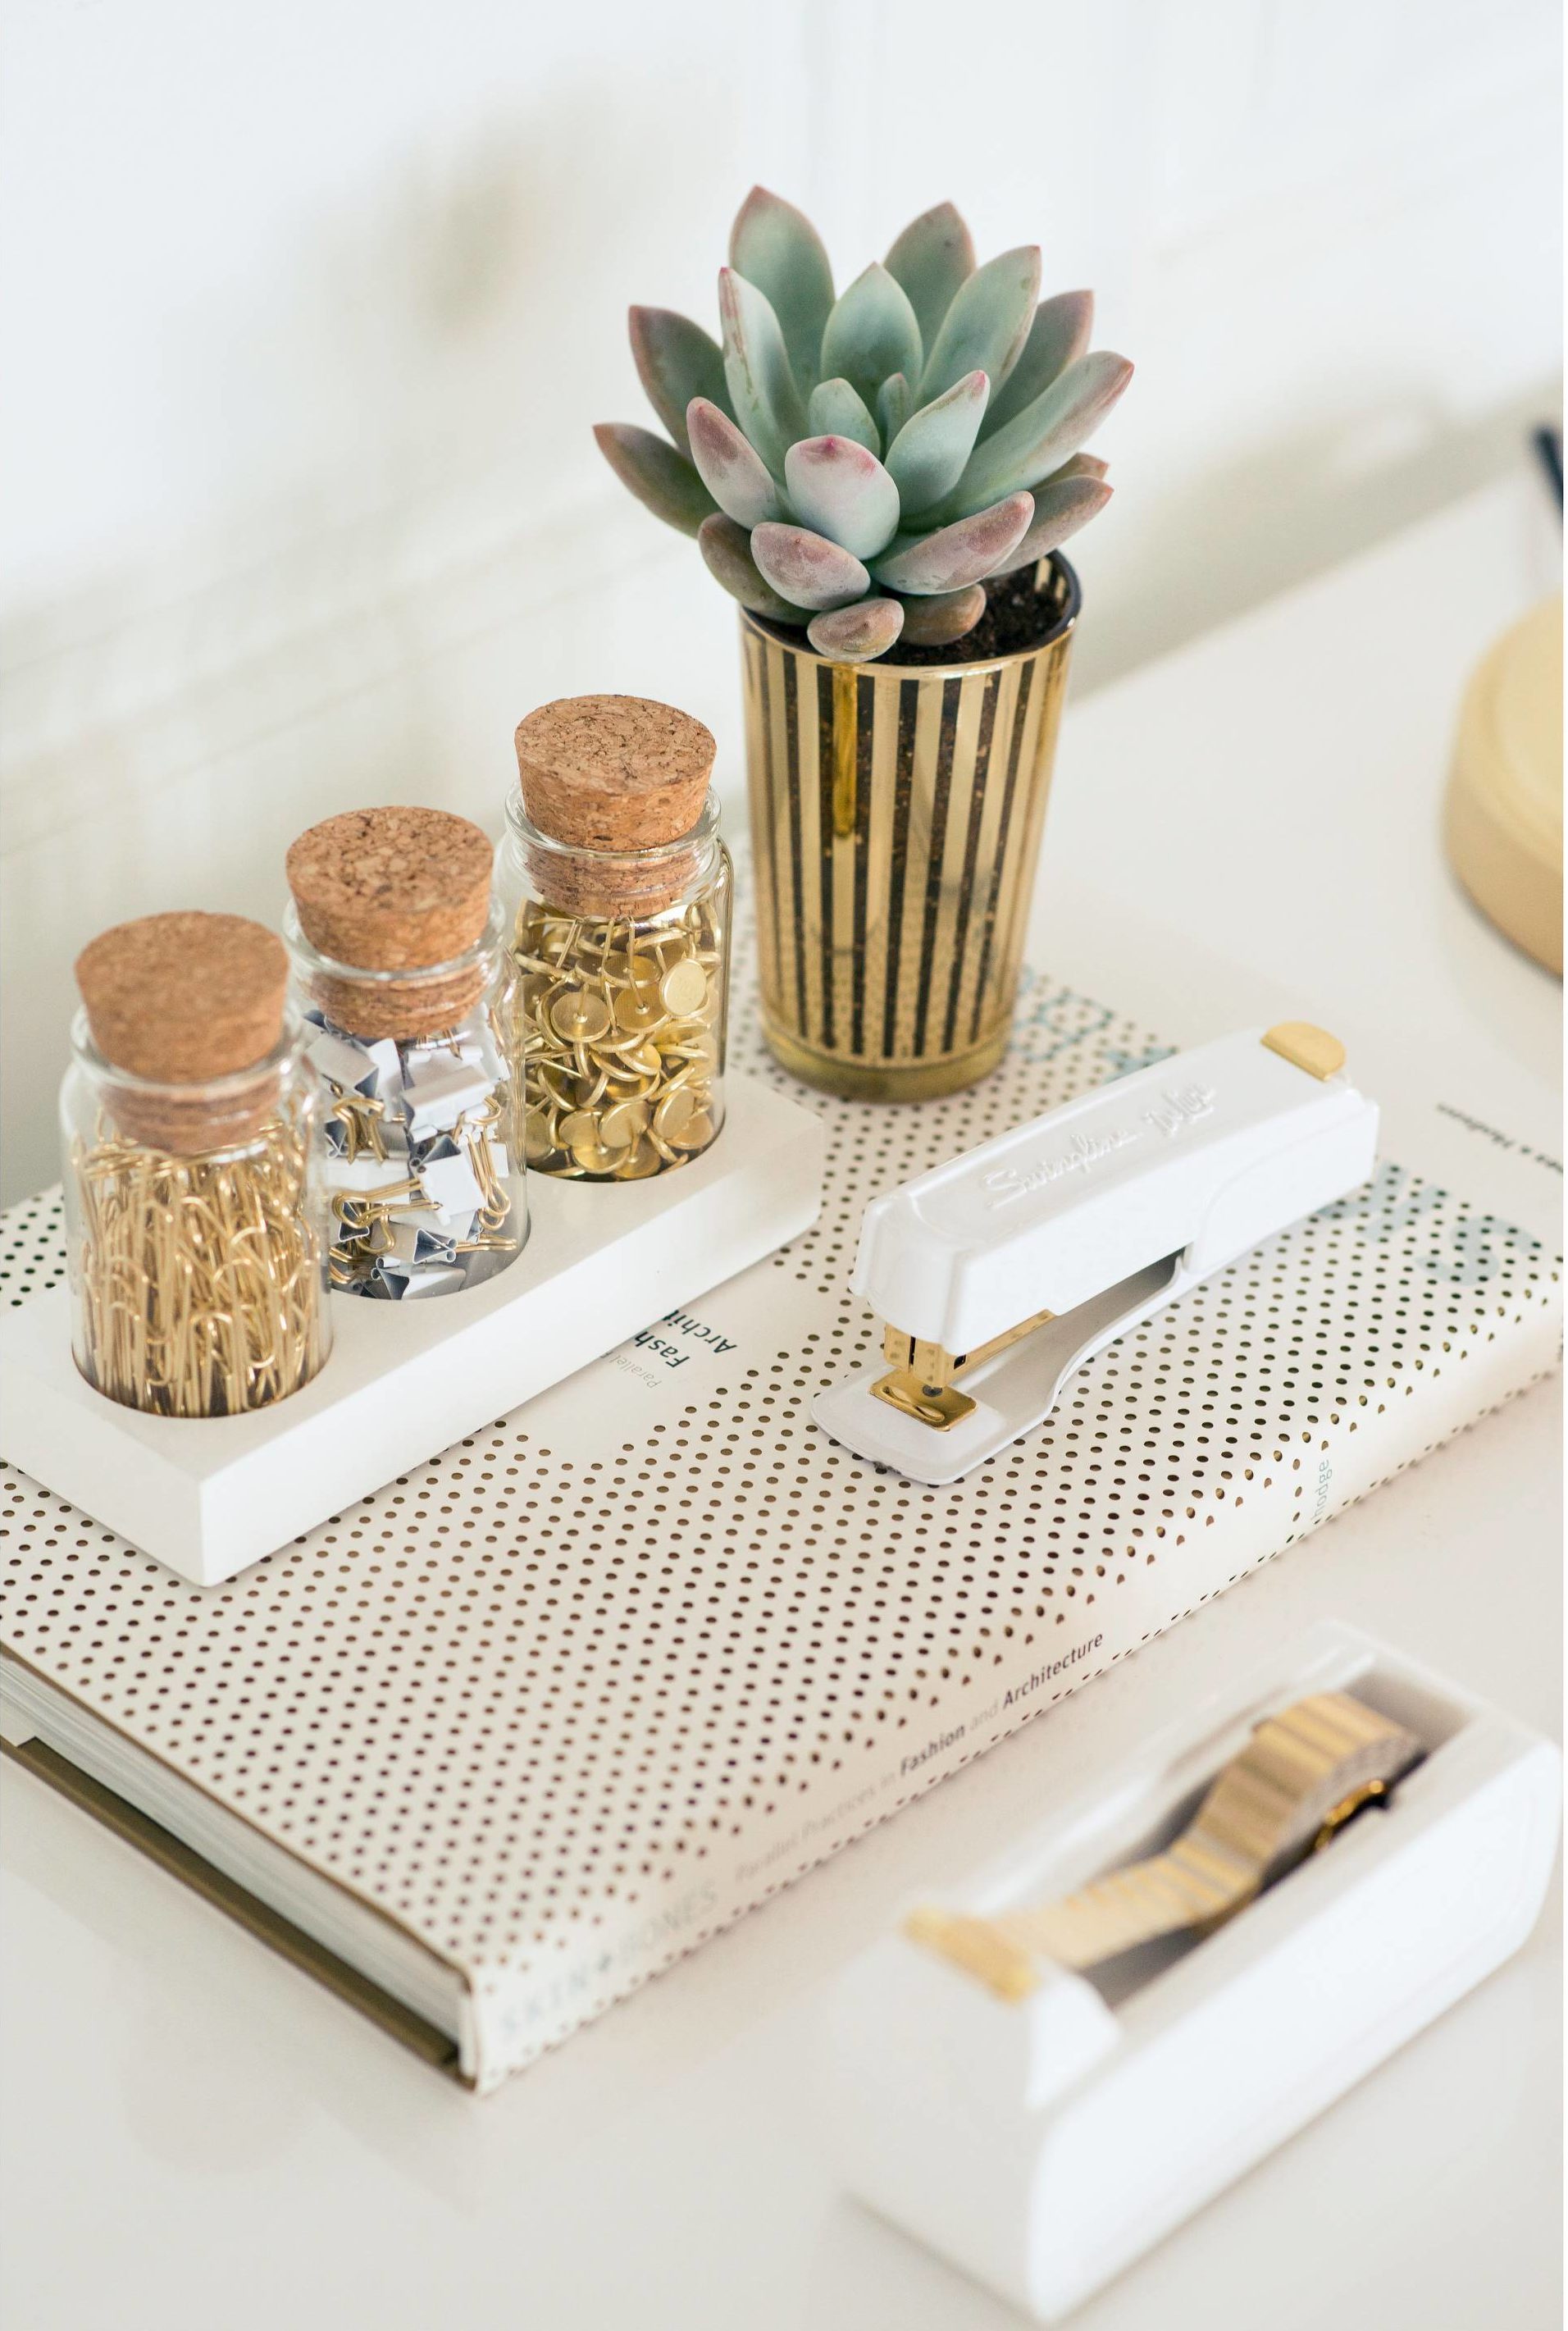 10+ Craft Room Items from Target : Do you love Target as much as I do? Here are some amazing craft room items that you can get from Target! Click through for a full list of awesome craft room stuff!! | www.sewwhatalicia.com